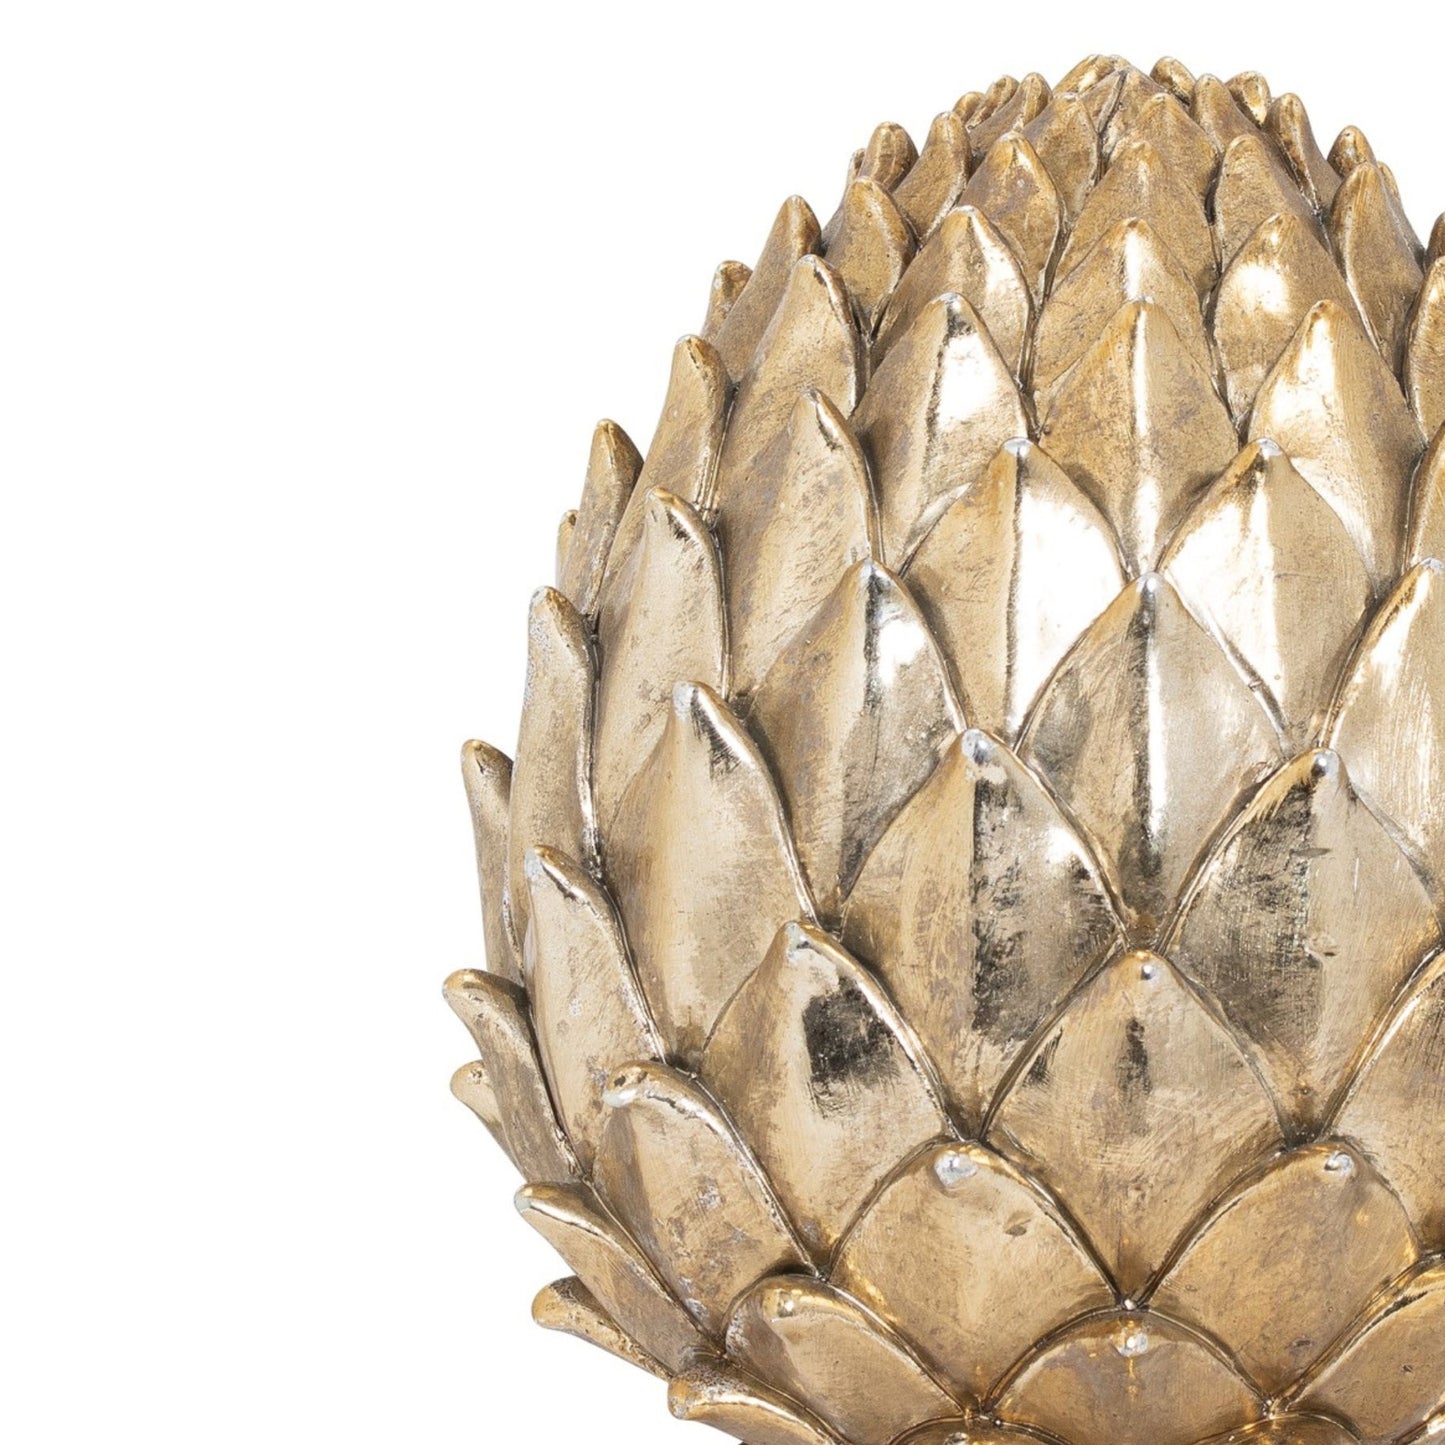 Gold Pinecone Finial